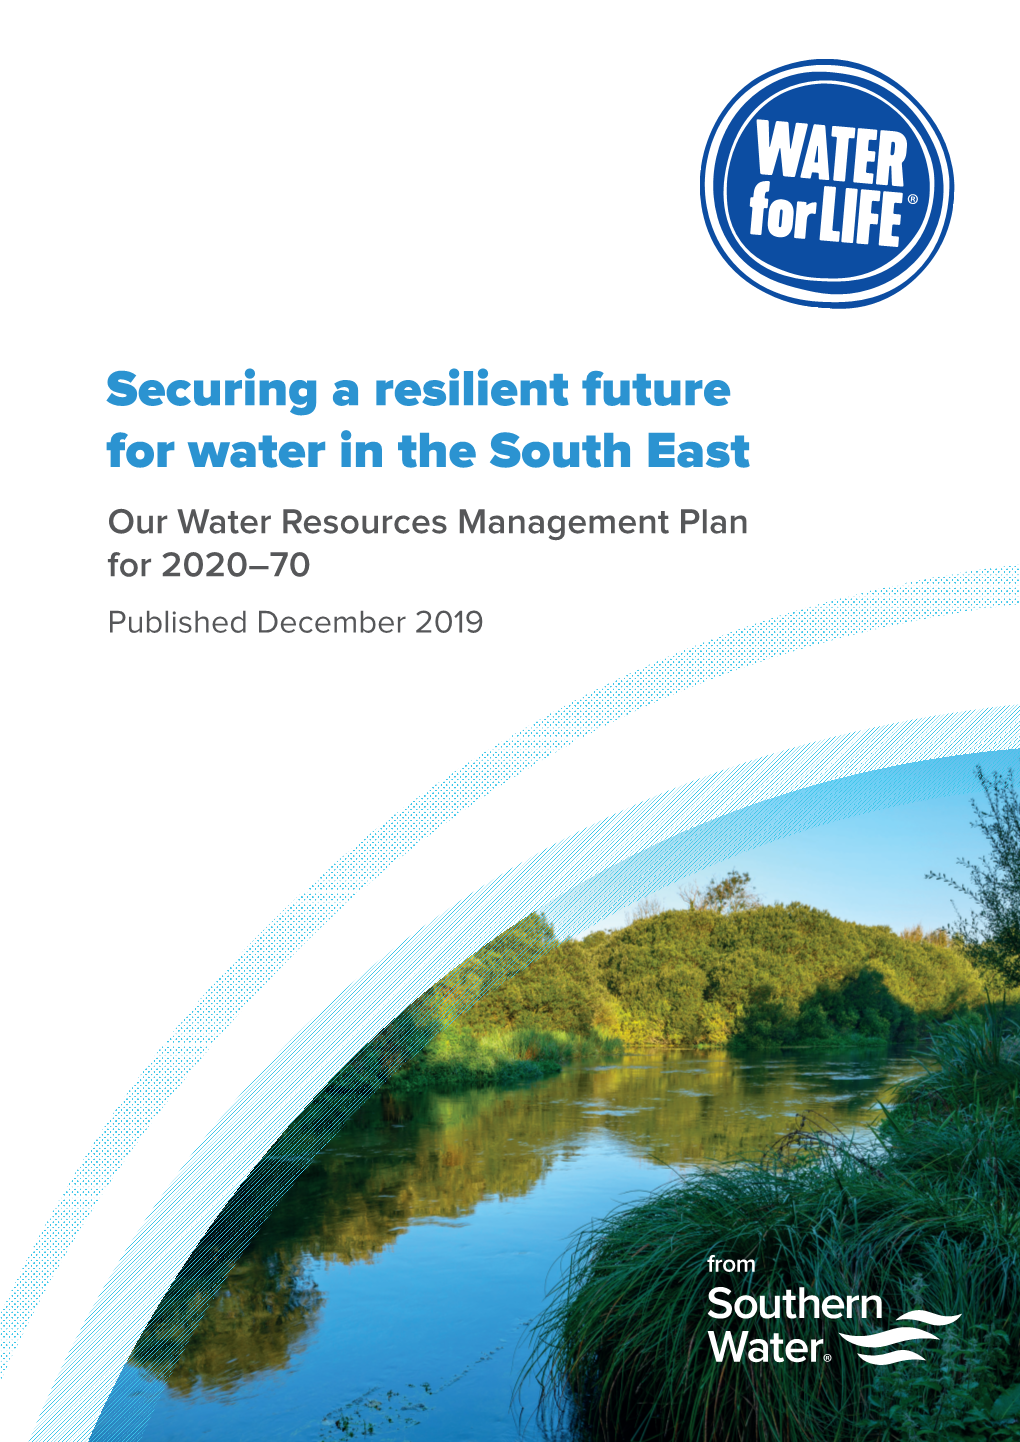 Securing a Resilient Future for Water in the South East